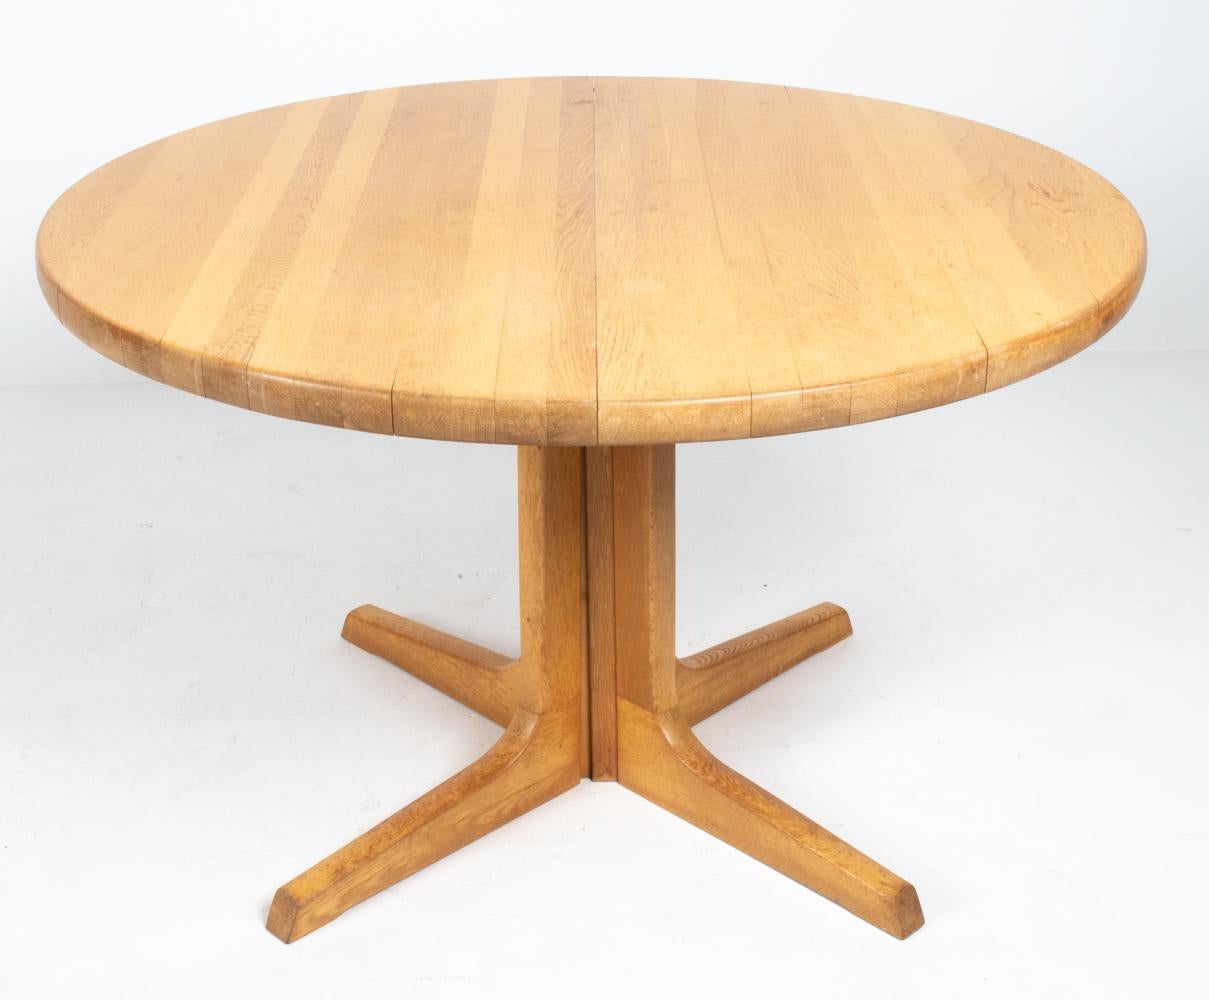 Oak Mid-Century Modern Extendable Dining Room Table by Niels Otto Møller, 1970s For Sale 5